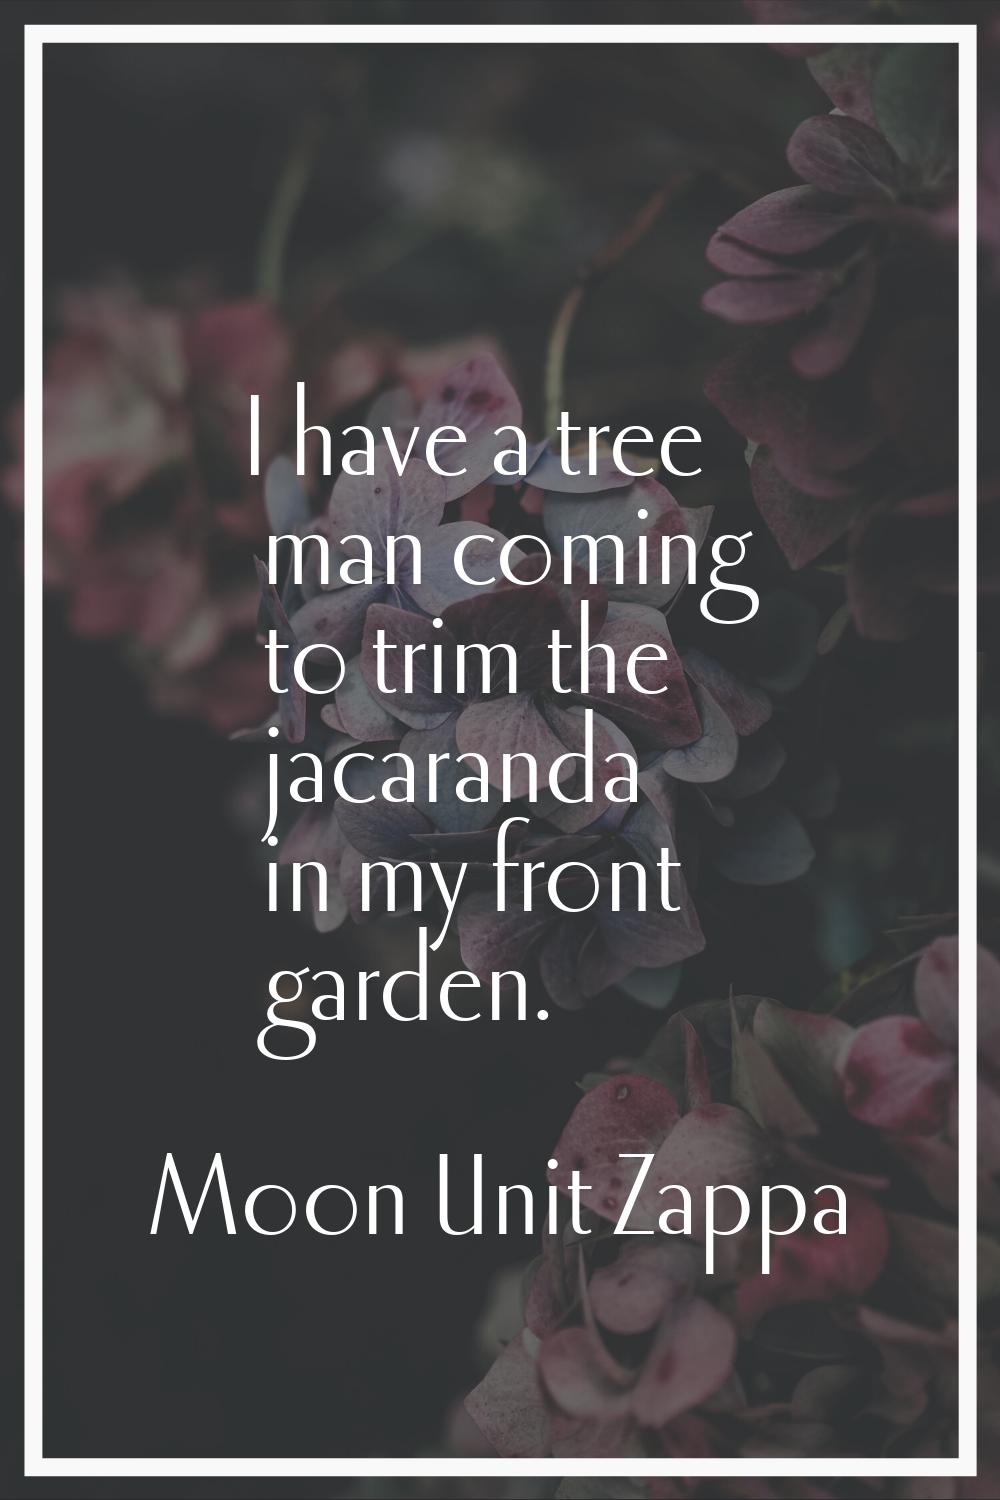 I have a tree man coming to trim the jacaranda in my front garden.